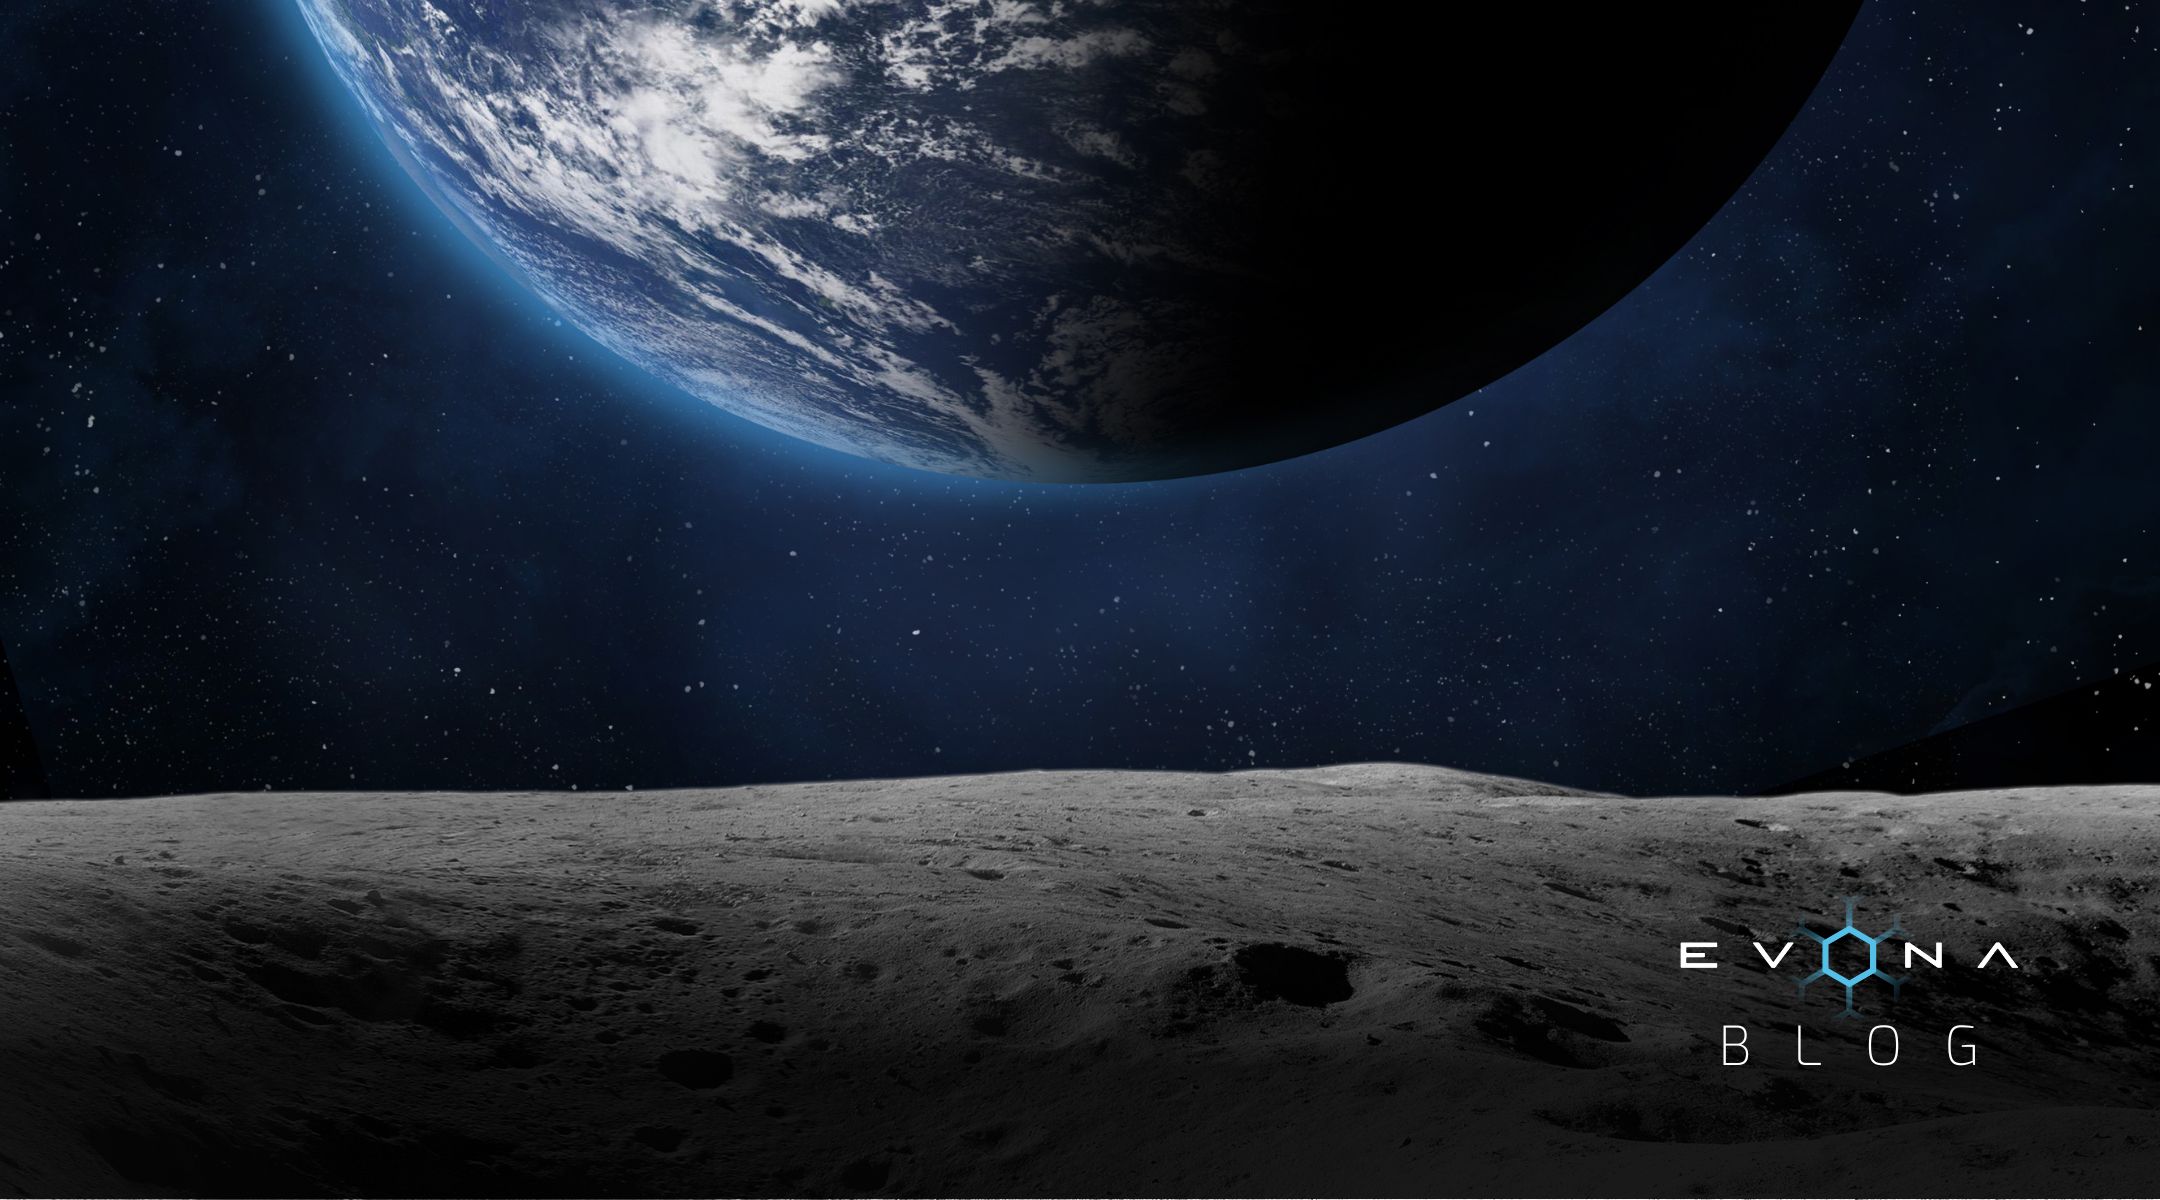 NASA Awards Firefly Aerospace $112 Million Contract for Mission to the Far Side of the Moon